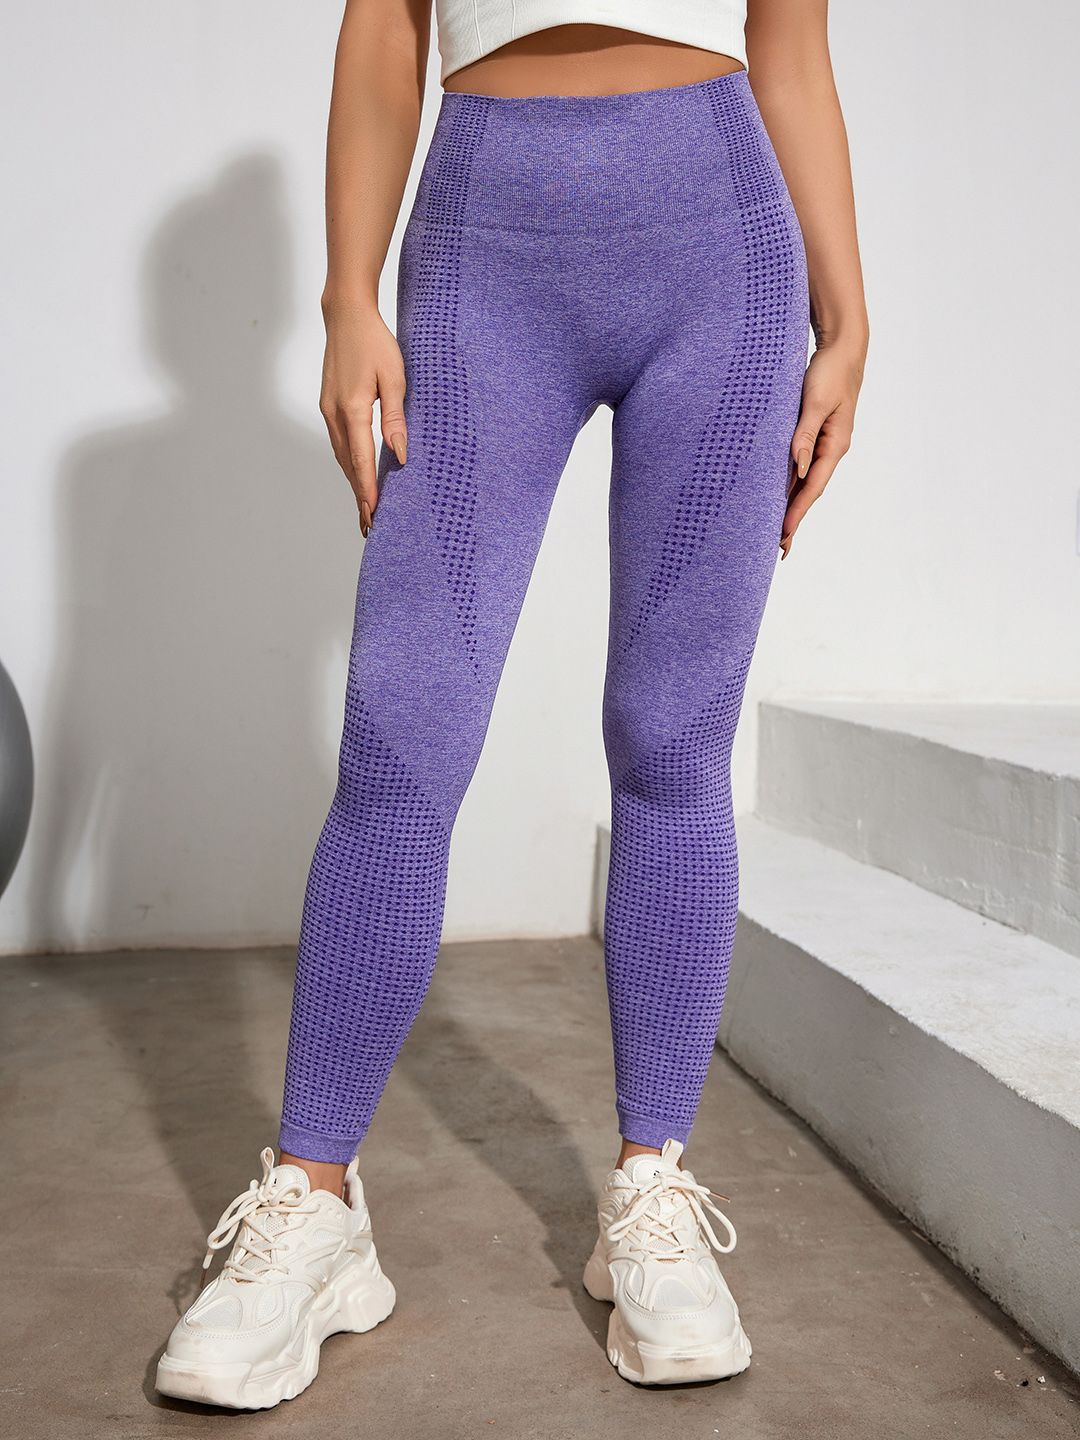 URBANIC Women Purple Patterned Training & Gym Tights Price in India